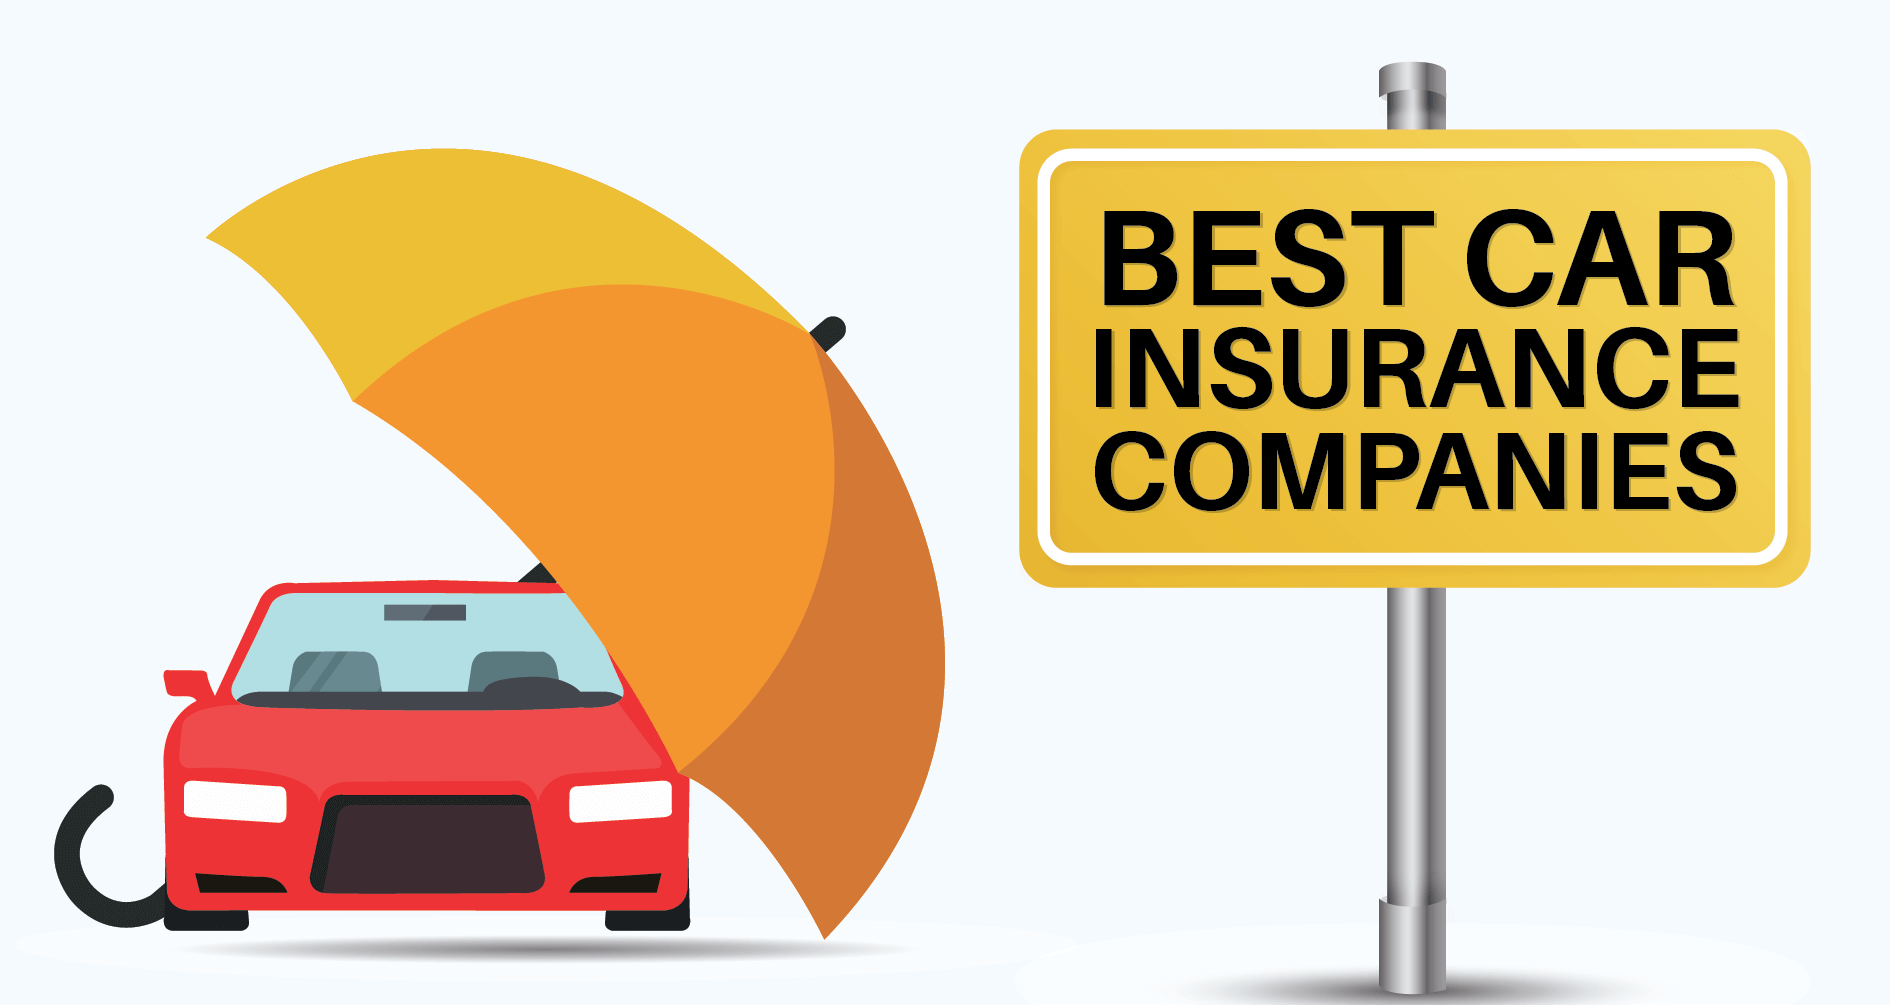 Best Car Insurance Companies In India With The Most Users